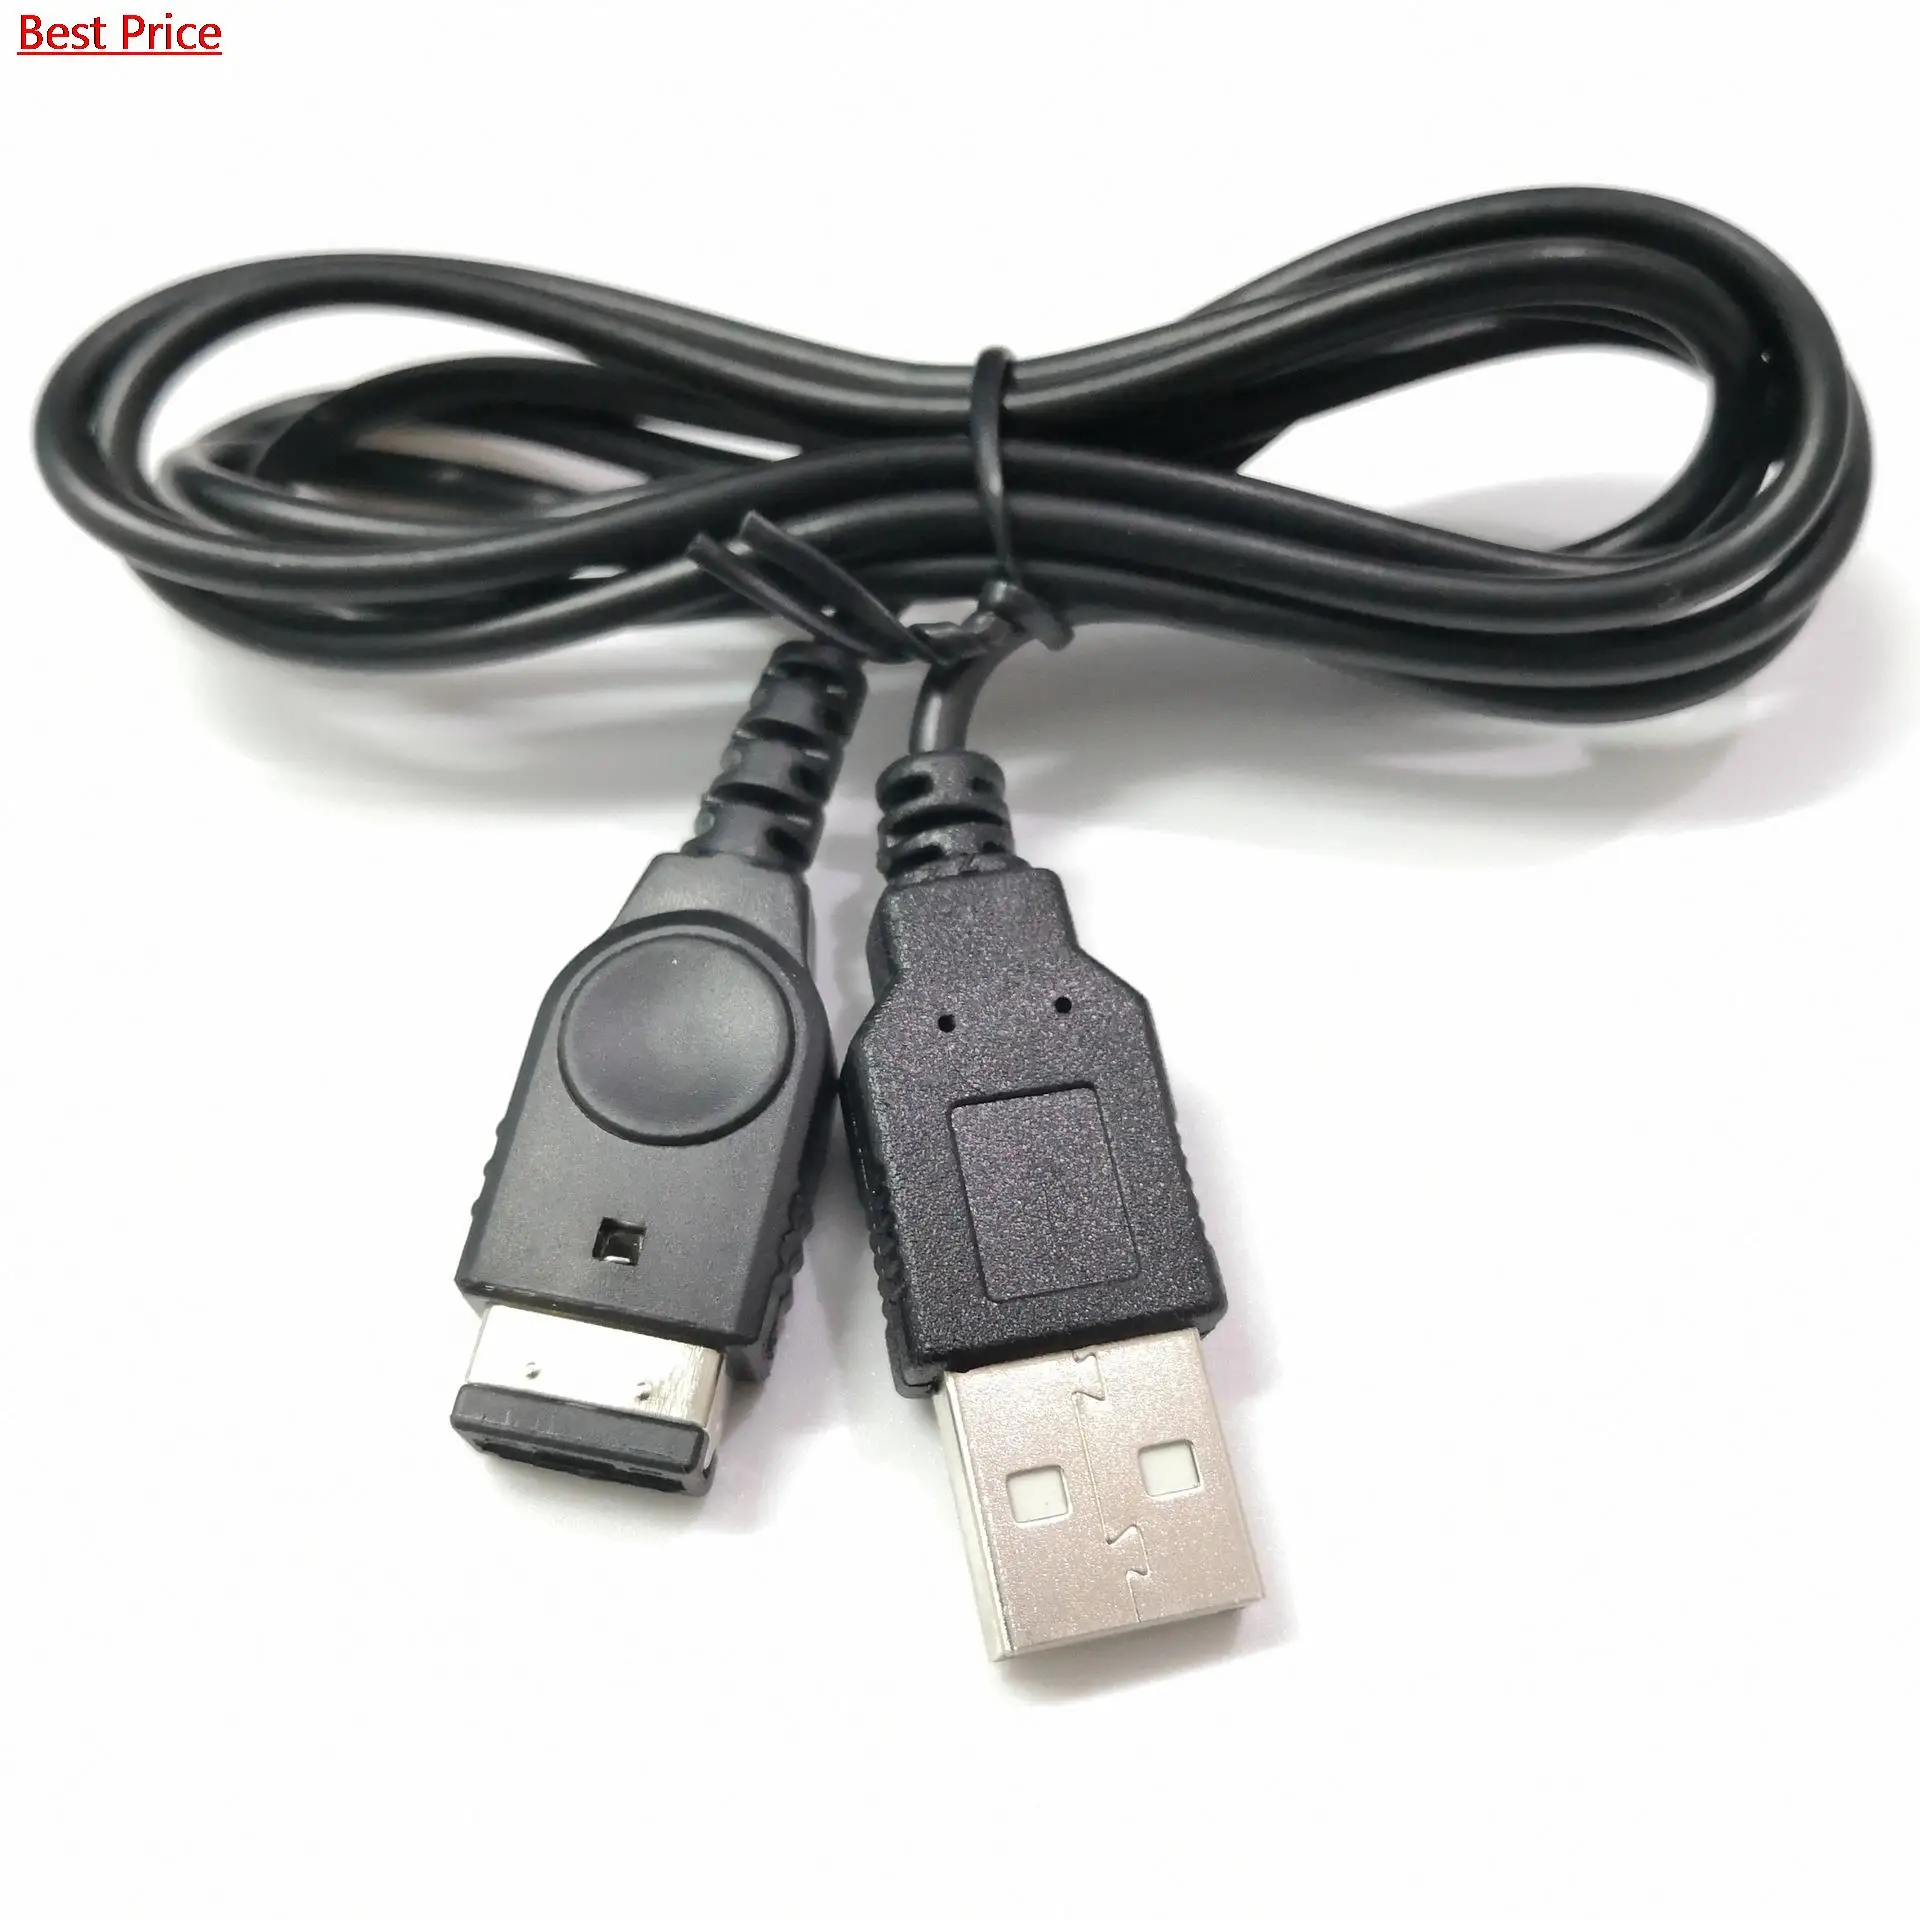 

100Pcs 1.2m Durable USB Charger Hot Selling Charging Lead Cable Fit Games Accessories for Nintend DS NDS Gameboy Advance SP GBA